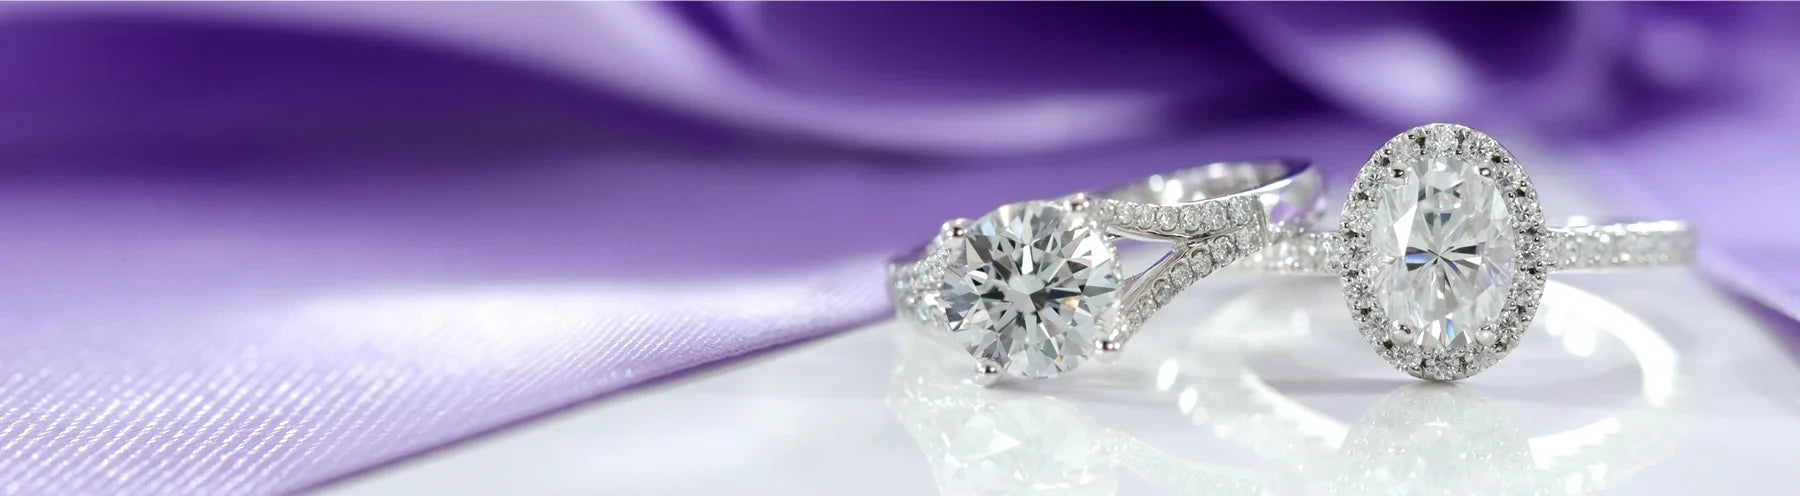 shop affordable engagement rings with lab diamonds in Canada at Quorri